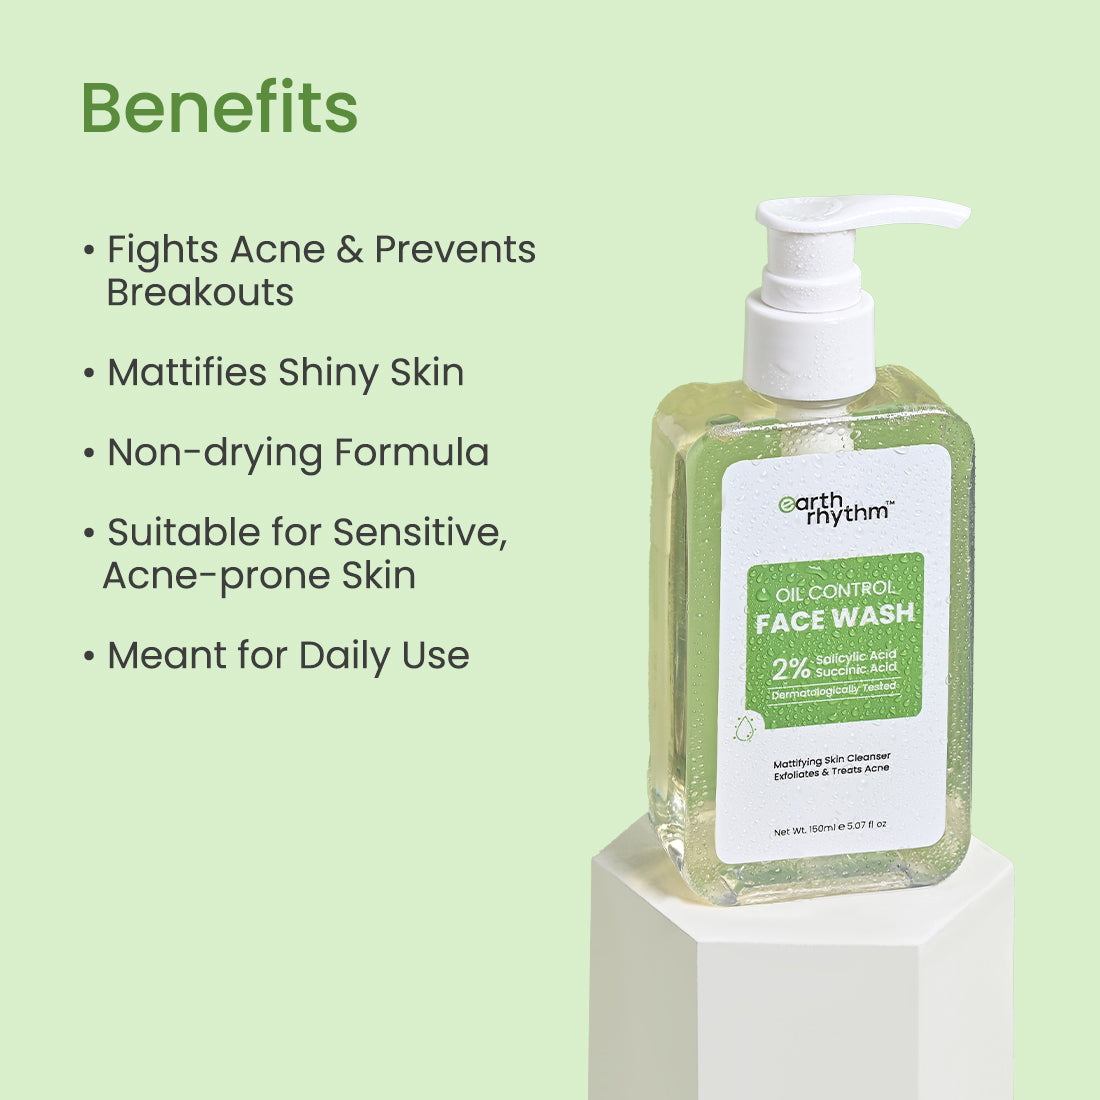 oil control face wash benefits